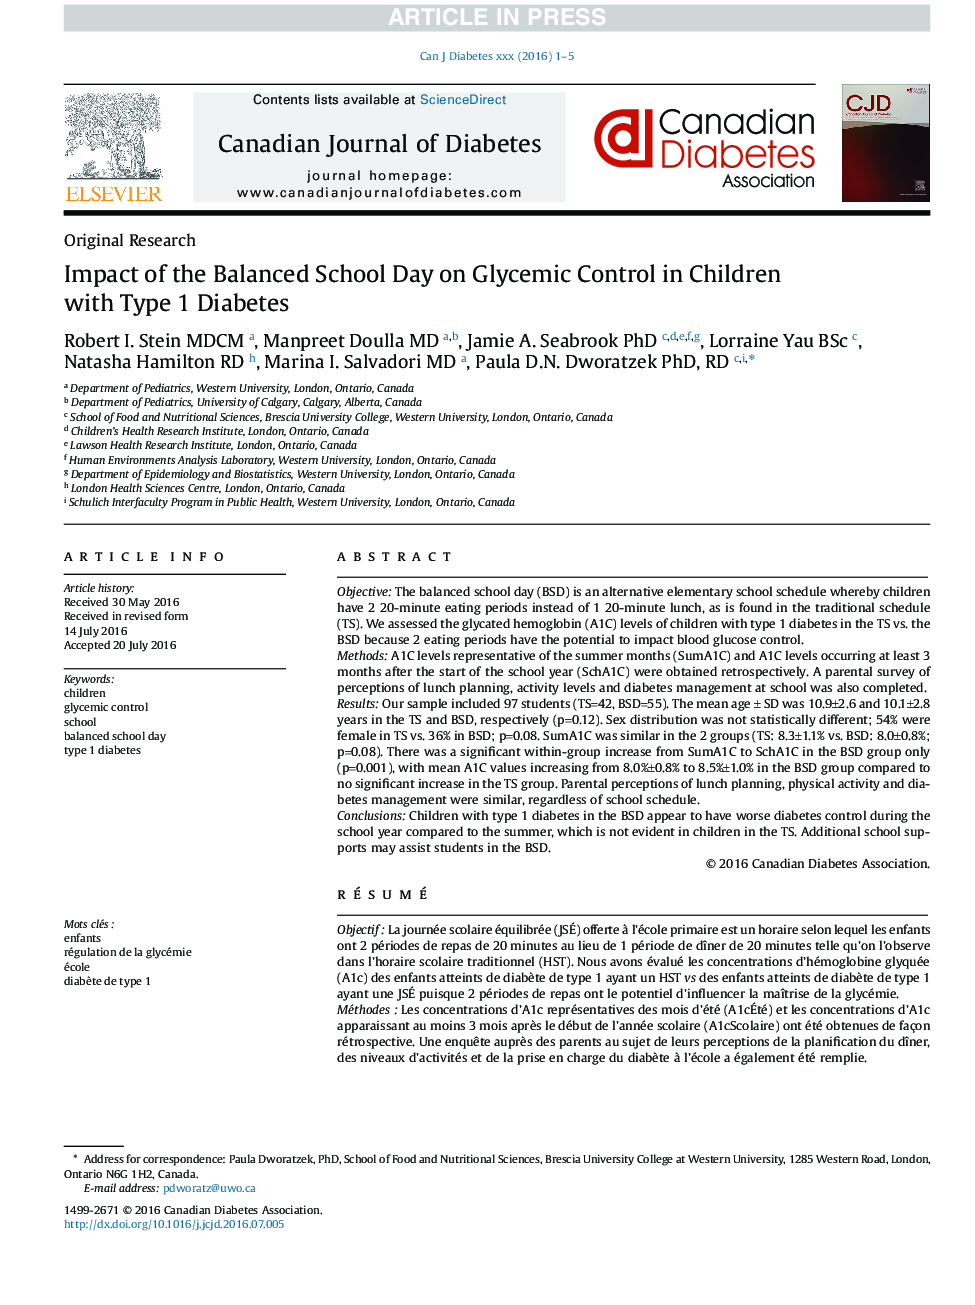 Impact of the Balanced School Day on Glycemic Control in Children with Type 1 Diabetes